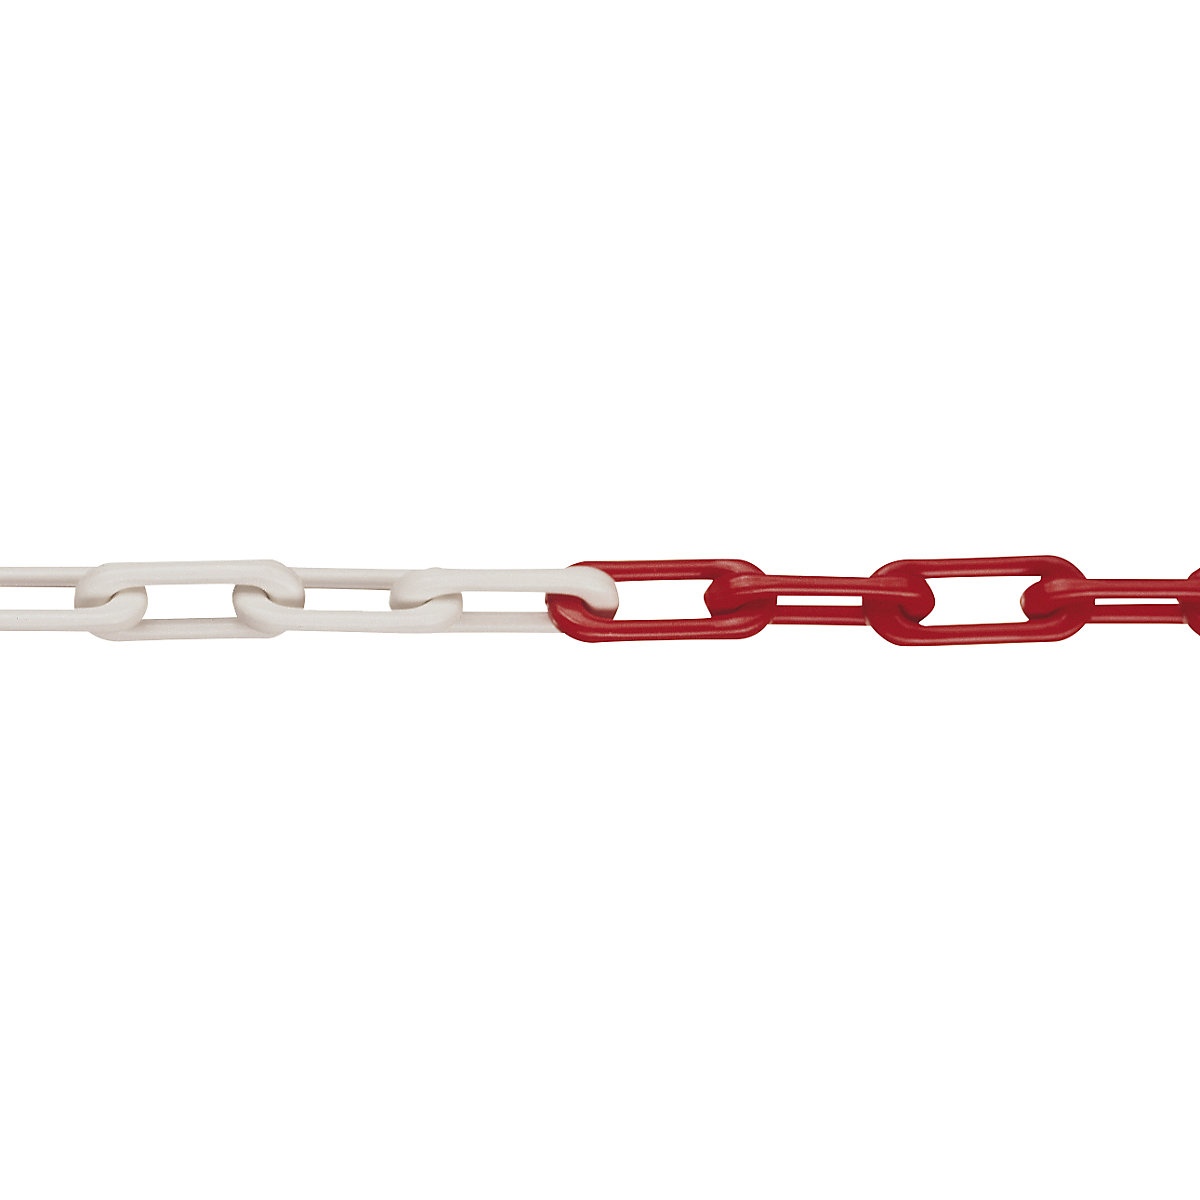 Nylon chain, MNK quality standard 6, band length 50 m, red/white, 10+ items-4